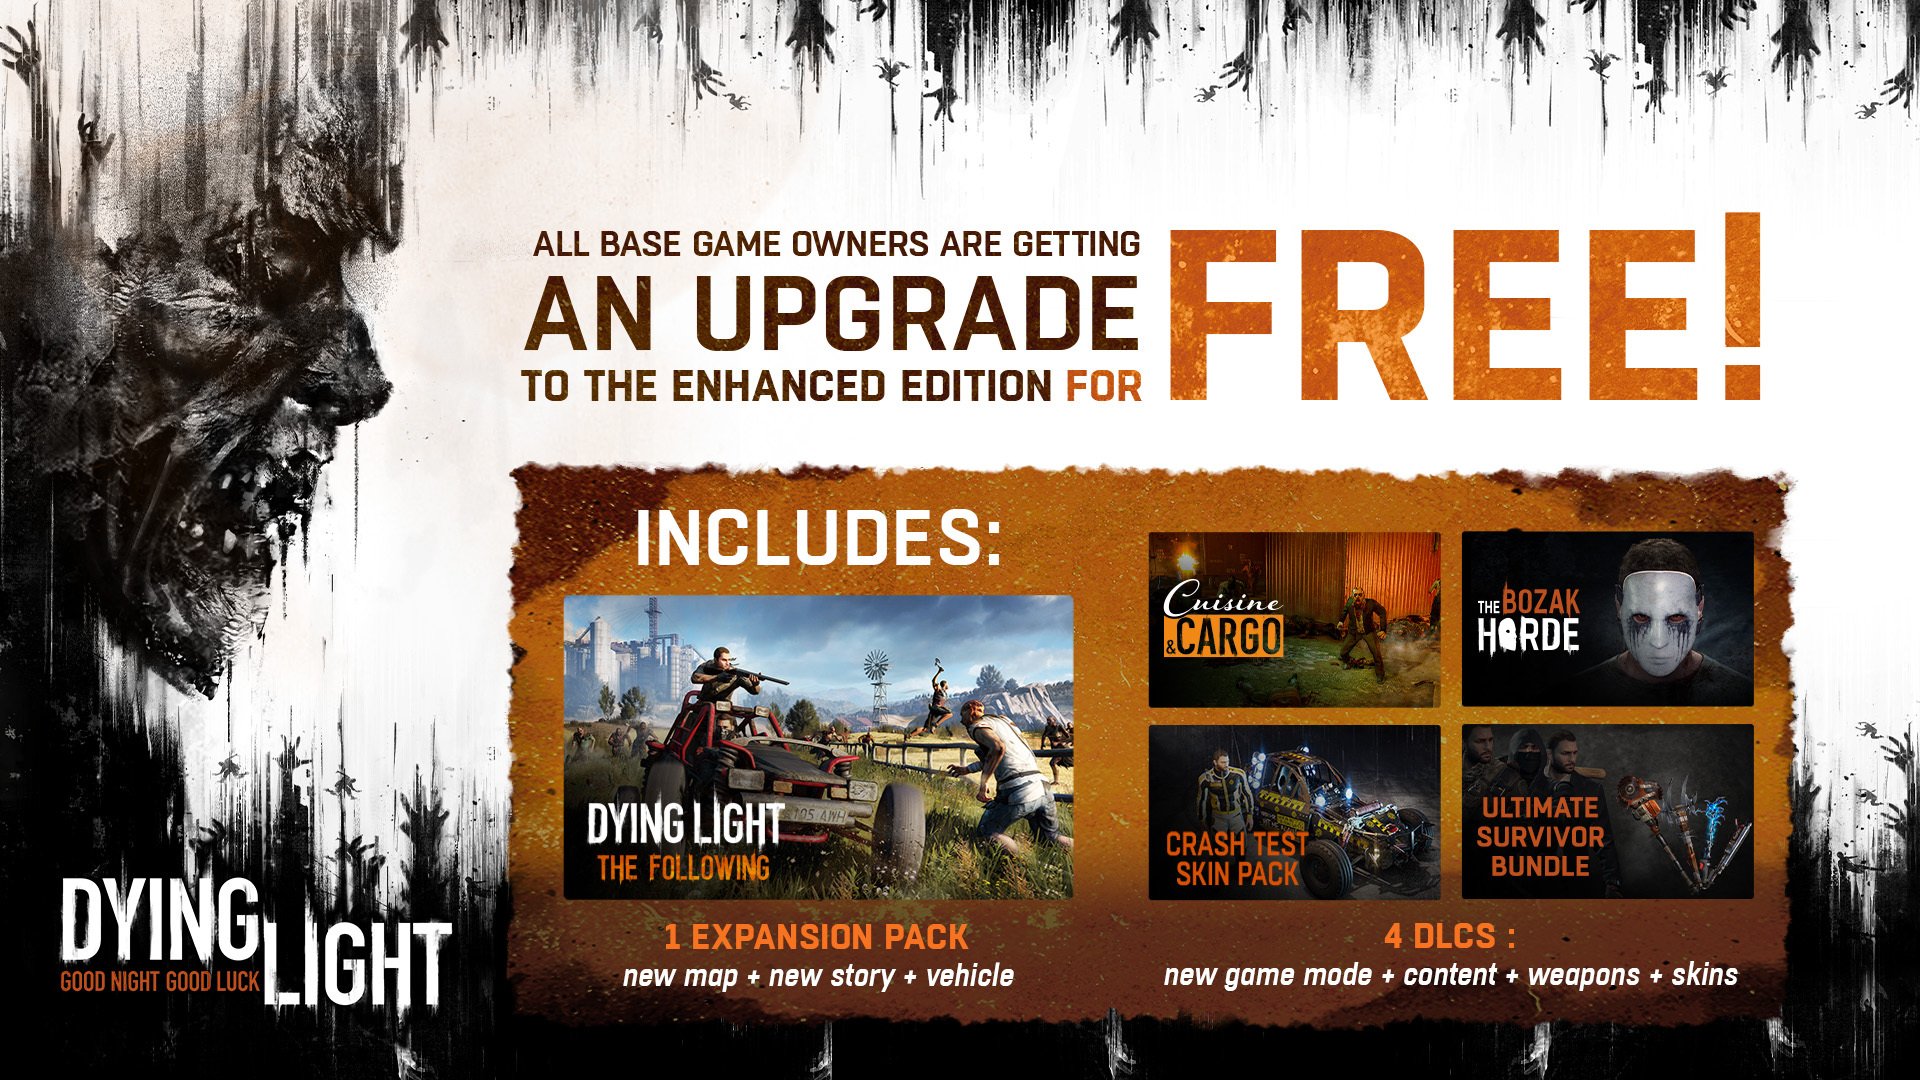 Forretningsmand Egnet Skæbne Dying Light on Twitter: "Great news! 😍 Starting today, every player that  owns the Standard Edition of Dying Light will be automatically upgraded to  the Enhanced Edition. #DyingLight https://t.co/jmSfQ3RkCd" / Twitter